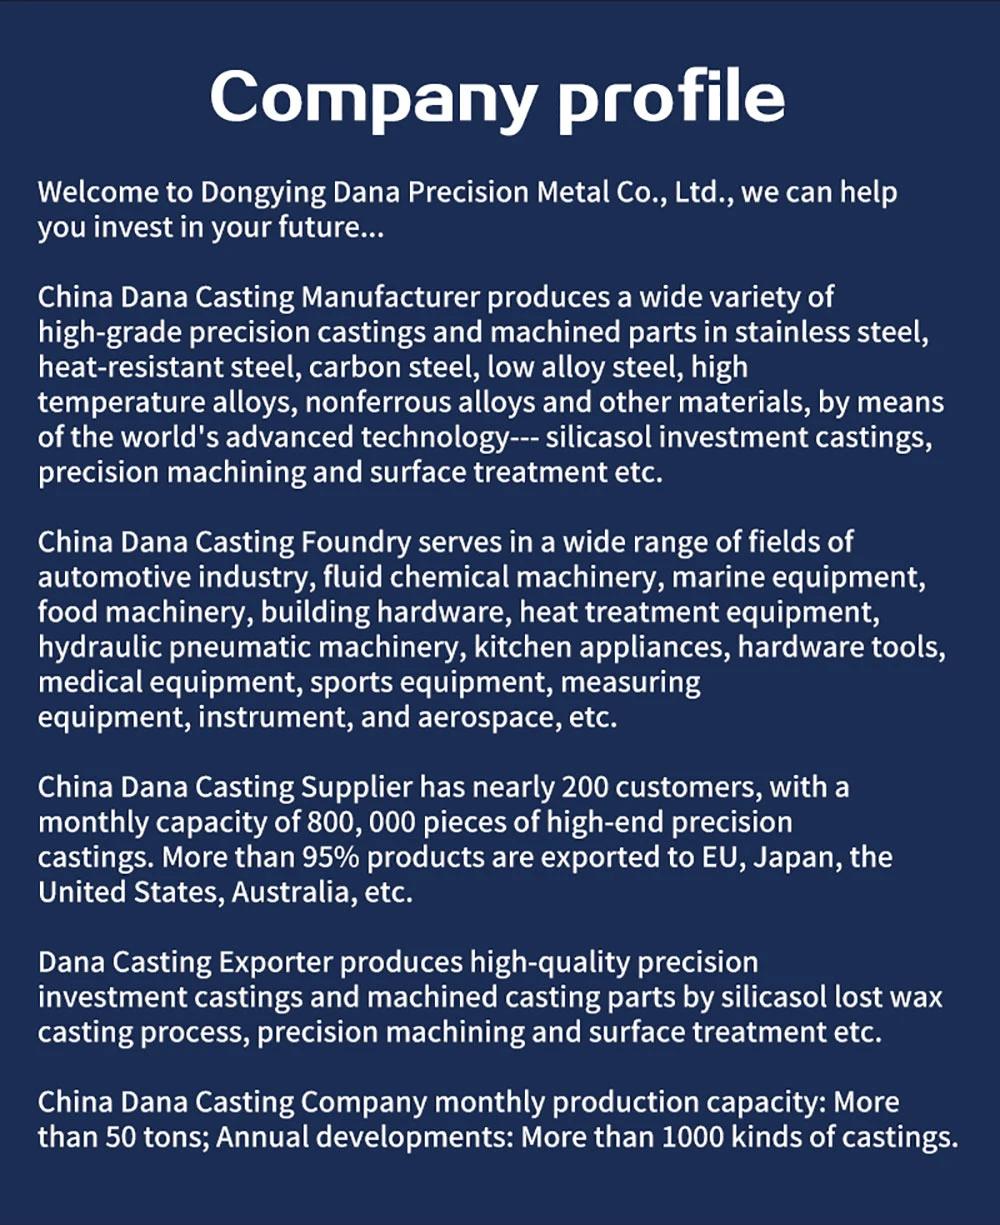 Precision Casting/ Stainless Steel Casting/ Die Casting/Investment Casting for Auto Parts